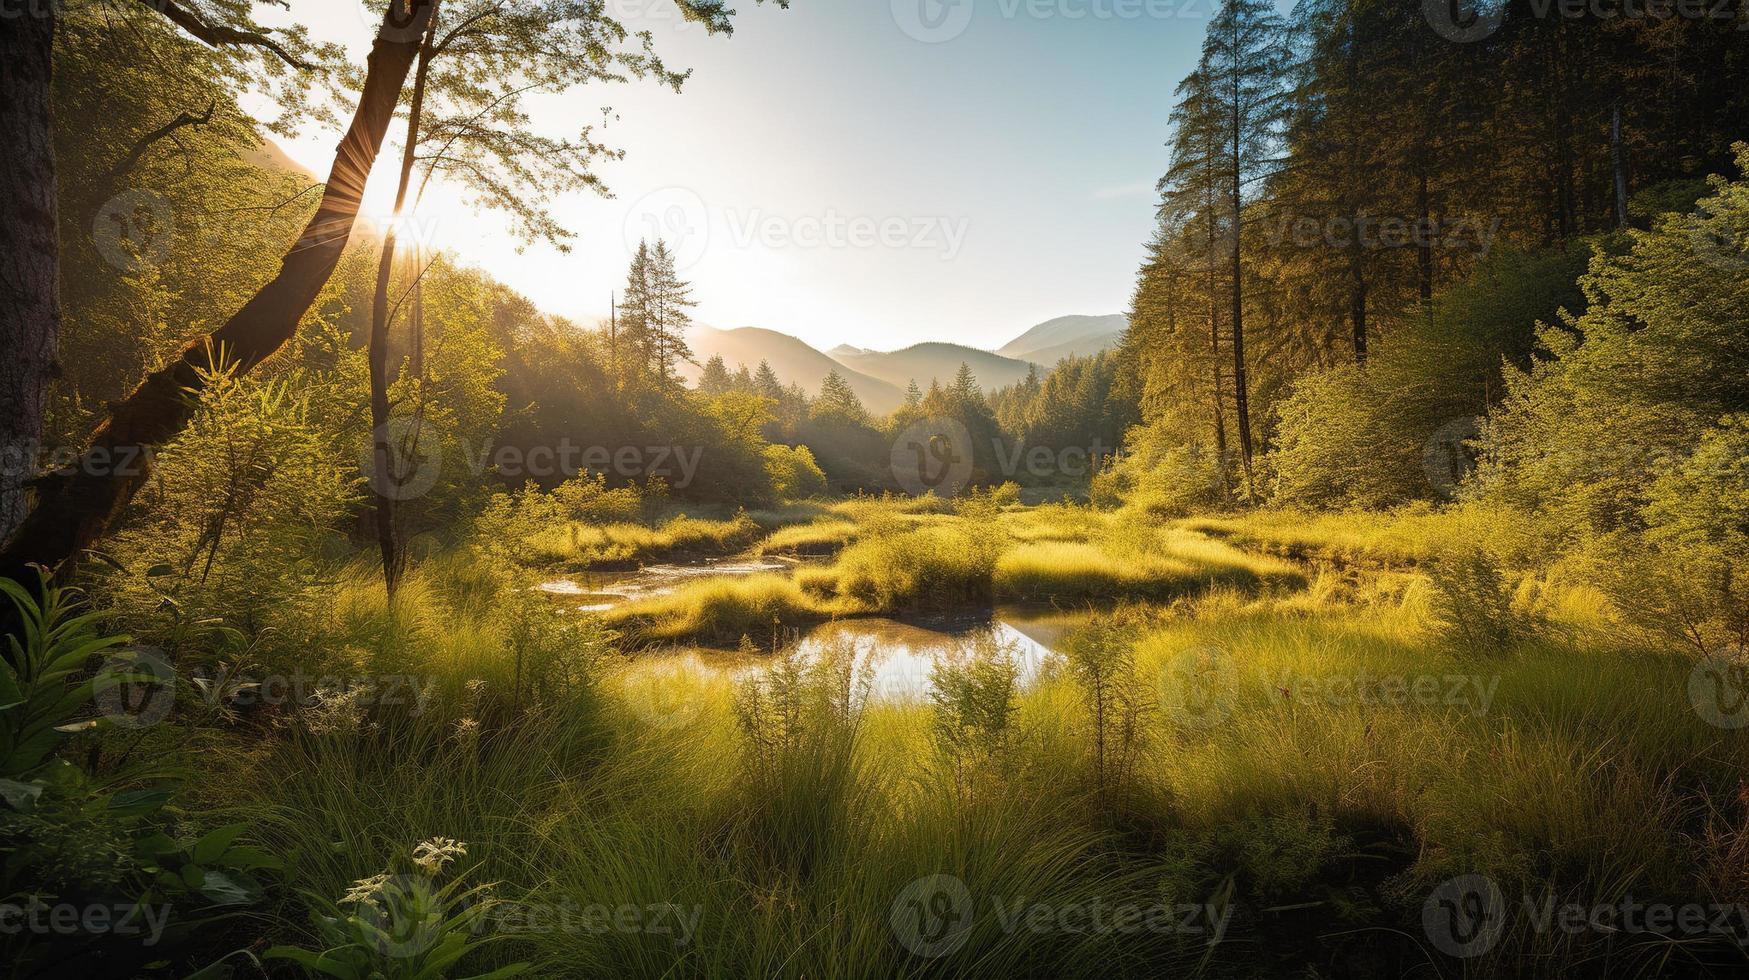 A peaceful forest clearing bathed in warm sunlight, surrounded by tall trees and lush foliage, with a gentle stream trickling through the undergrowth and a distant mountain range visible photo